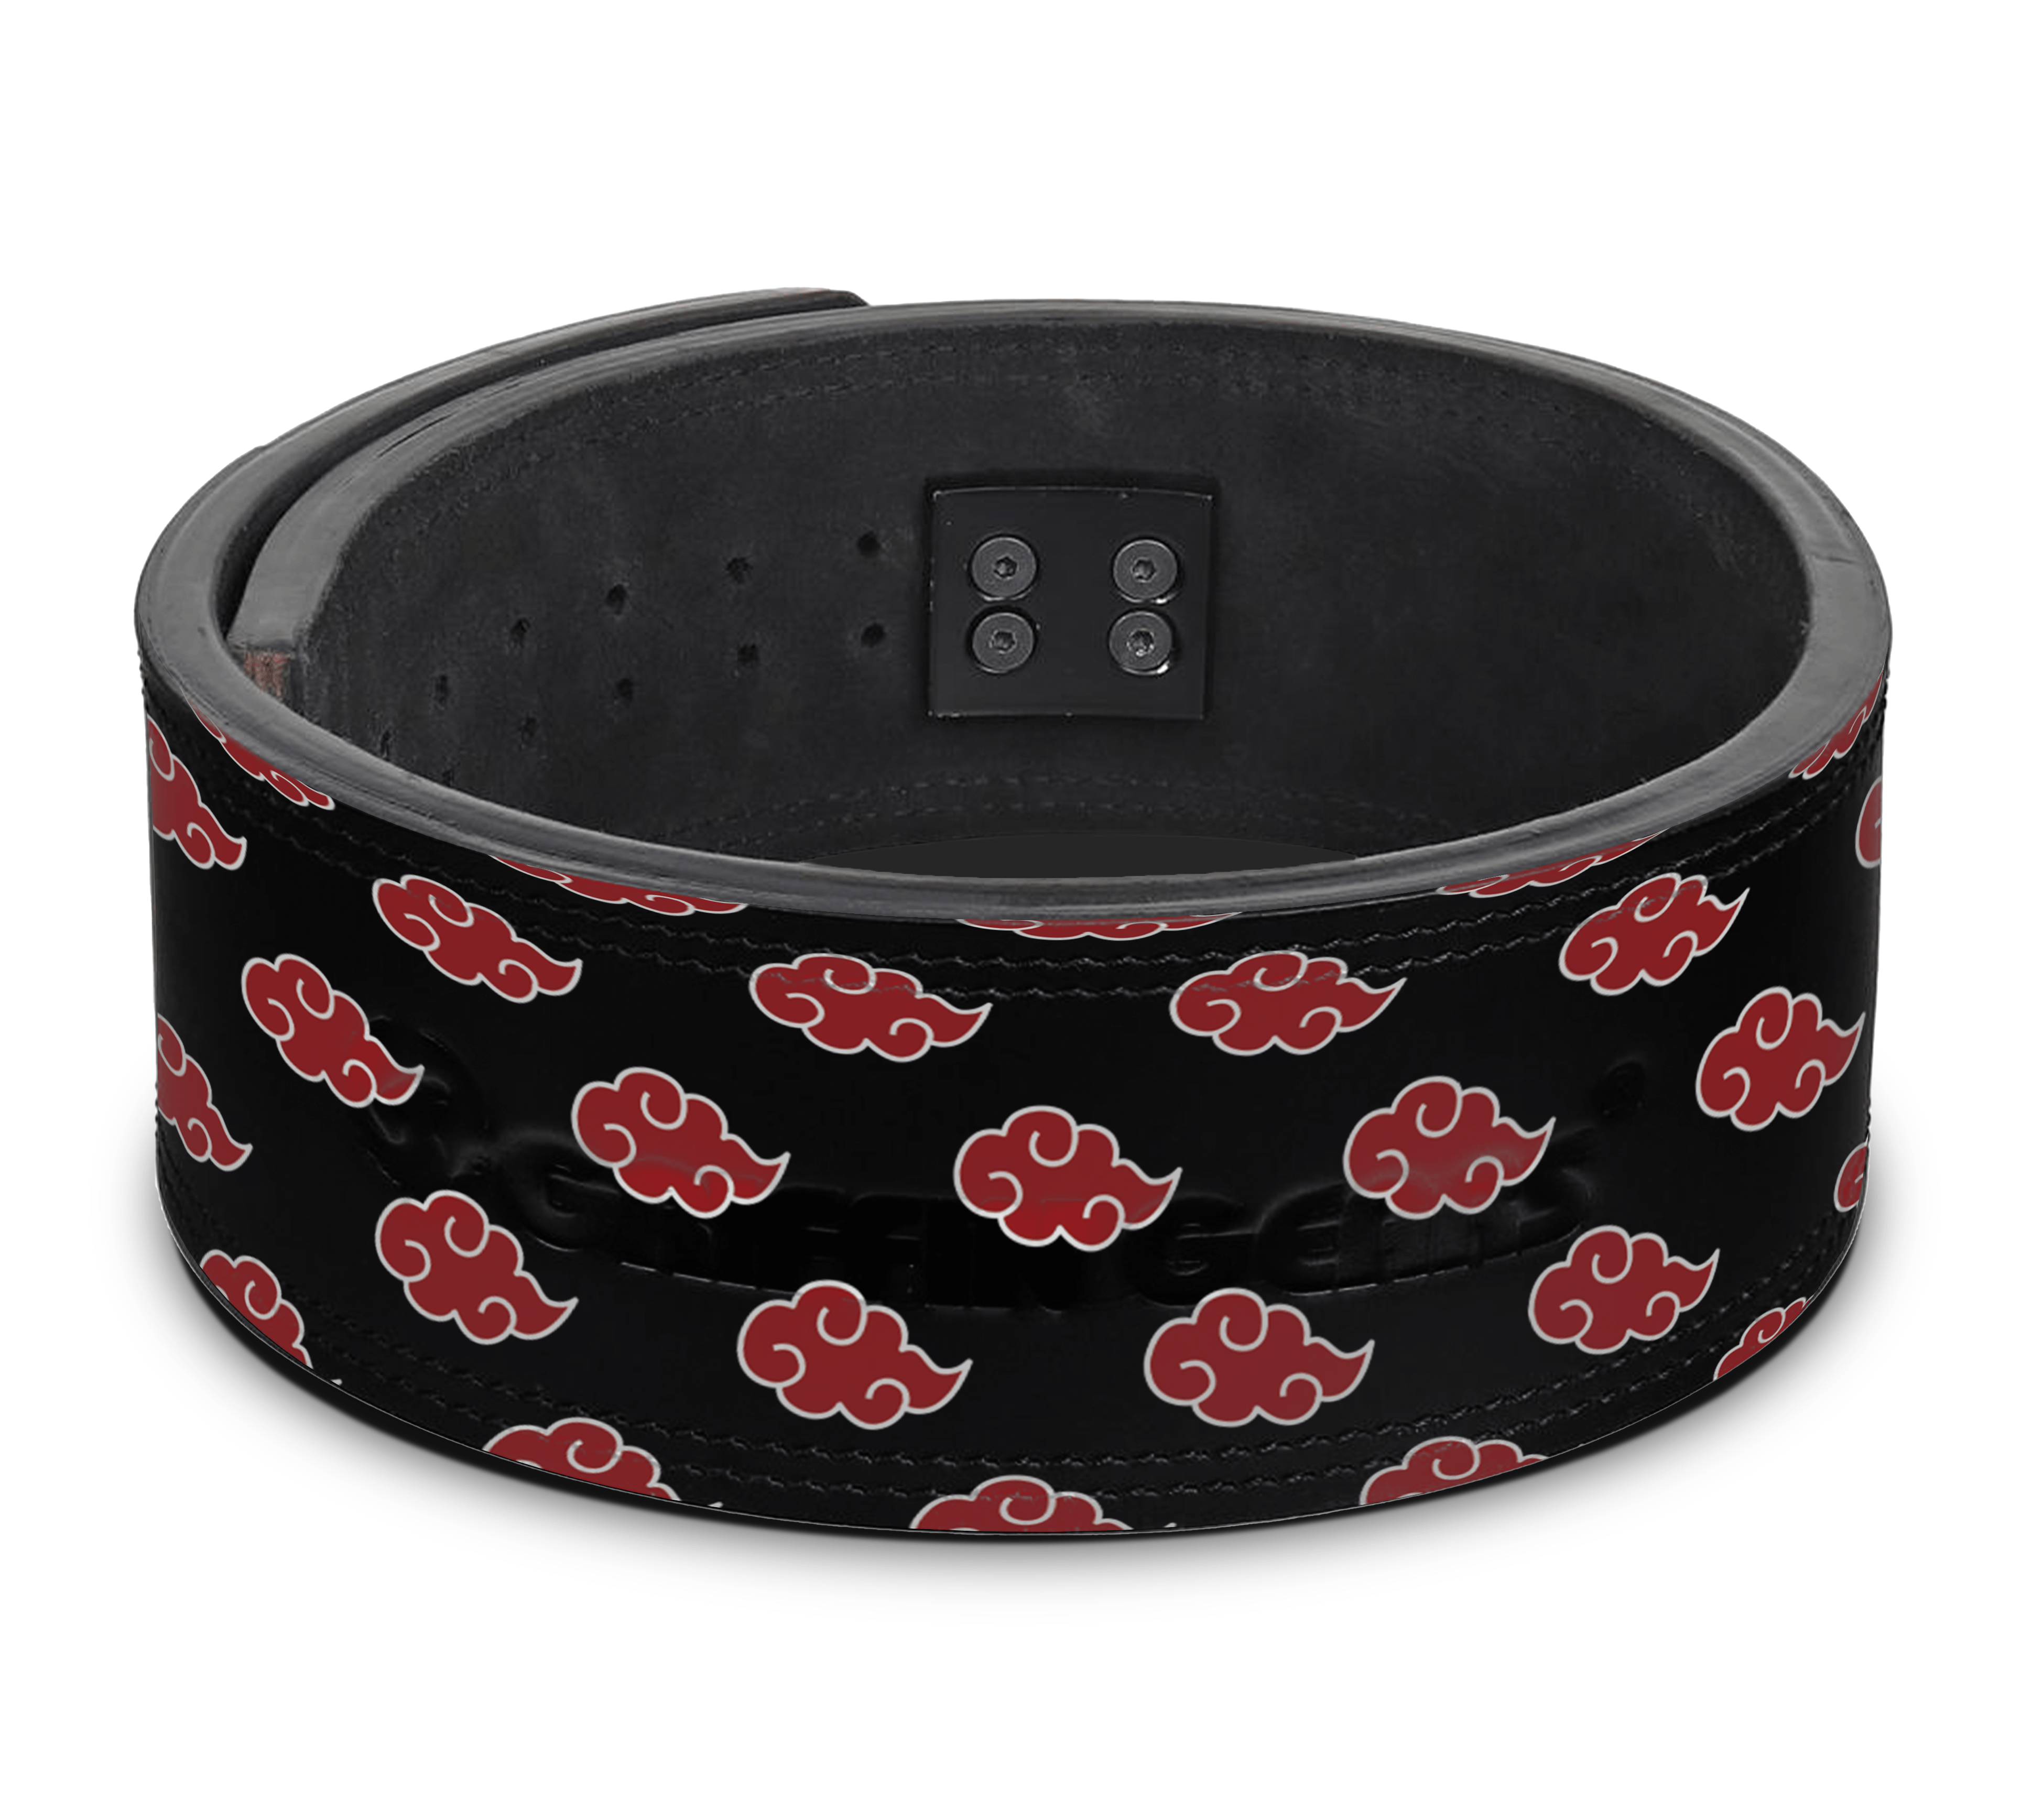 Source Good Quality Anime All Assessing New Adjustable Leaver Weightlifting  Belt on malibabacom